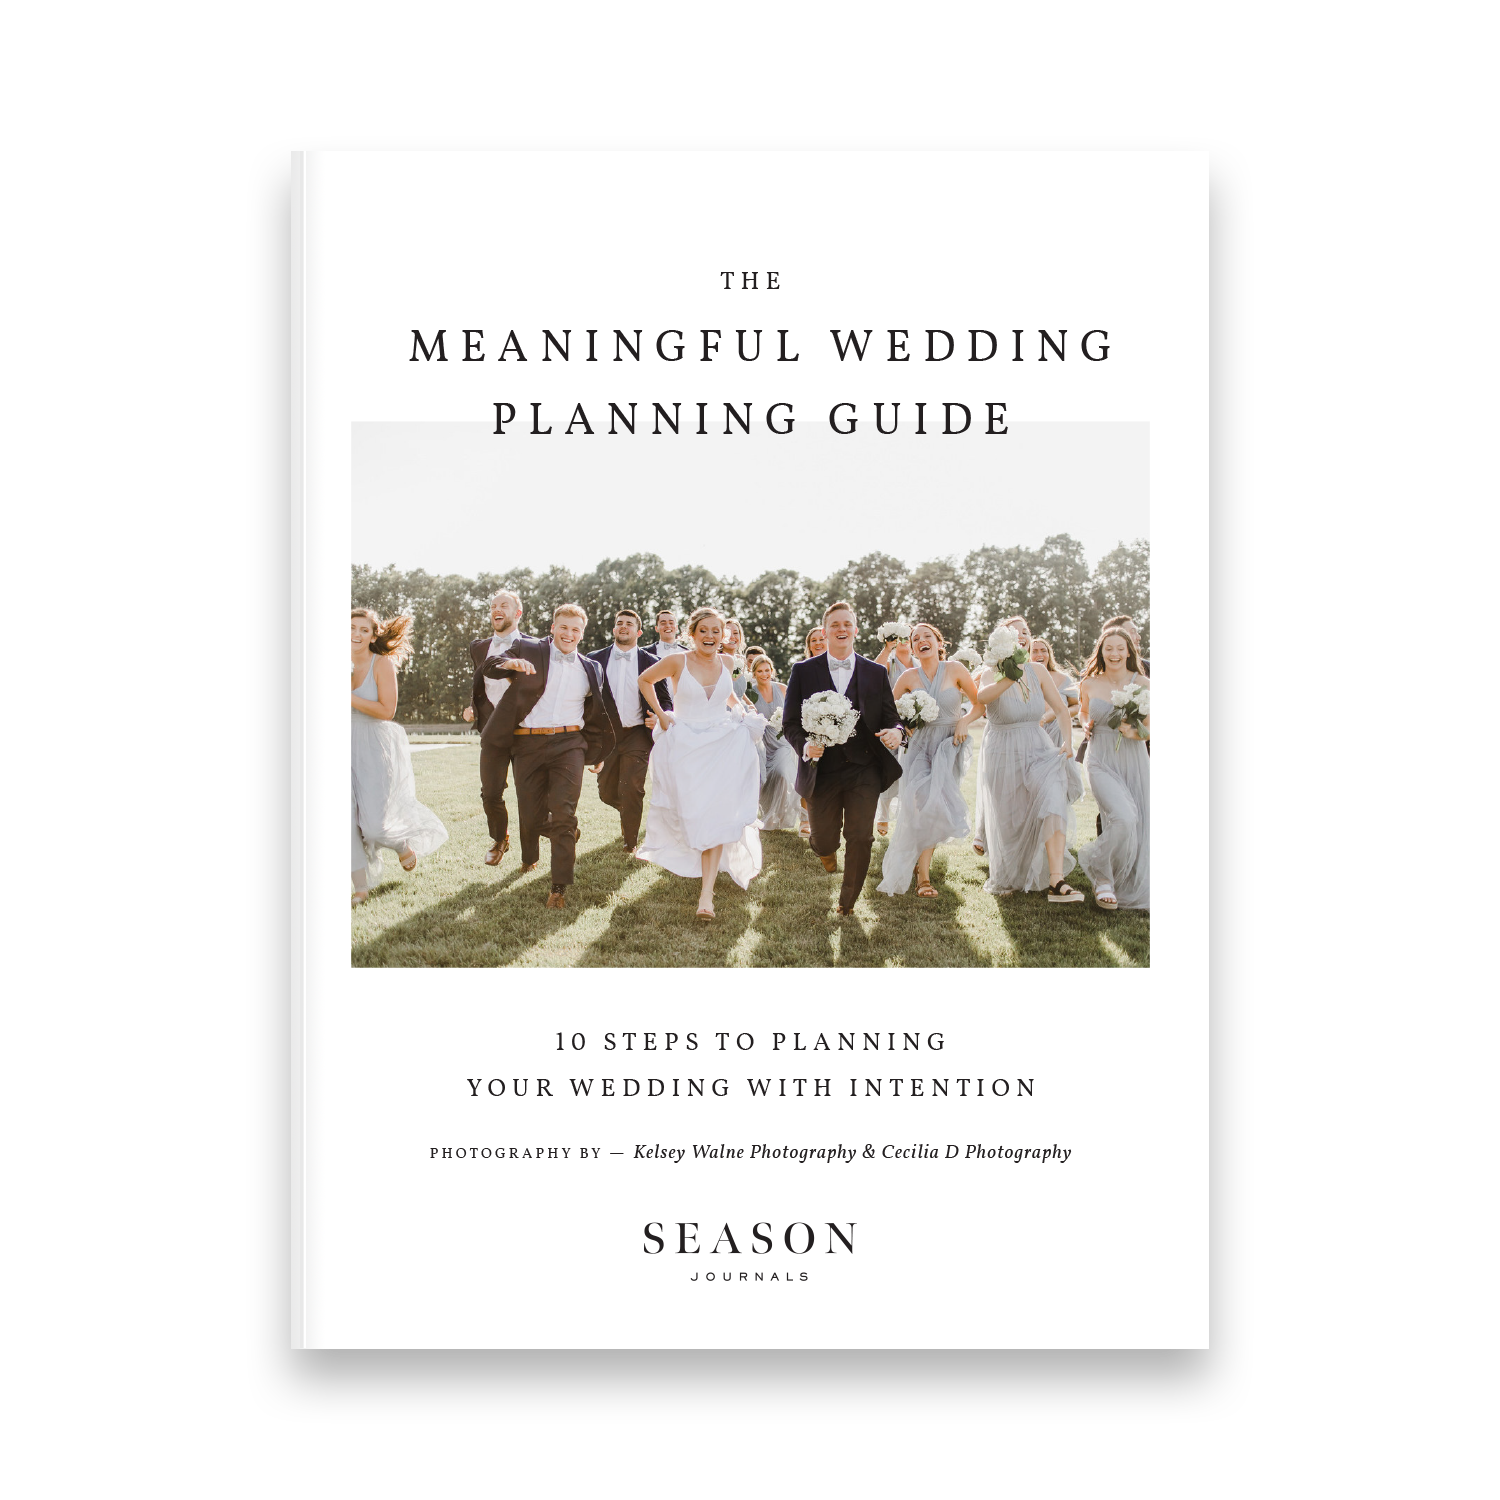 Meaningful Wedding Planning Guide